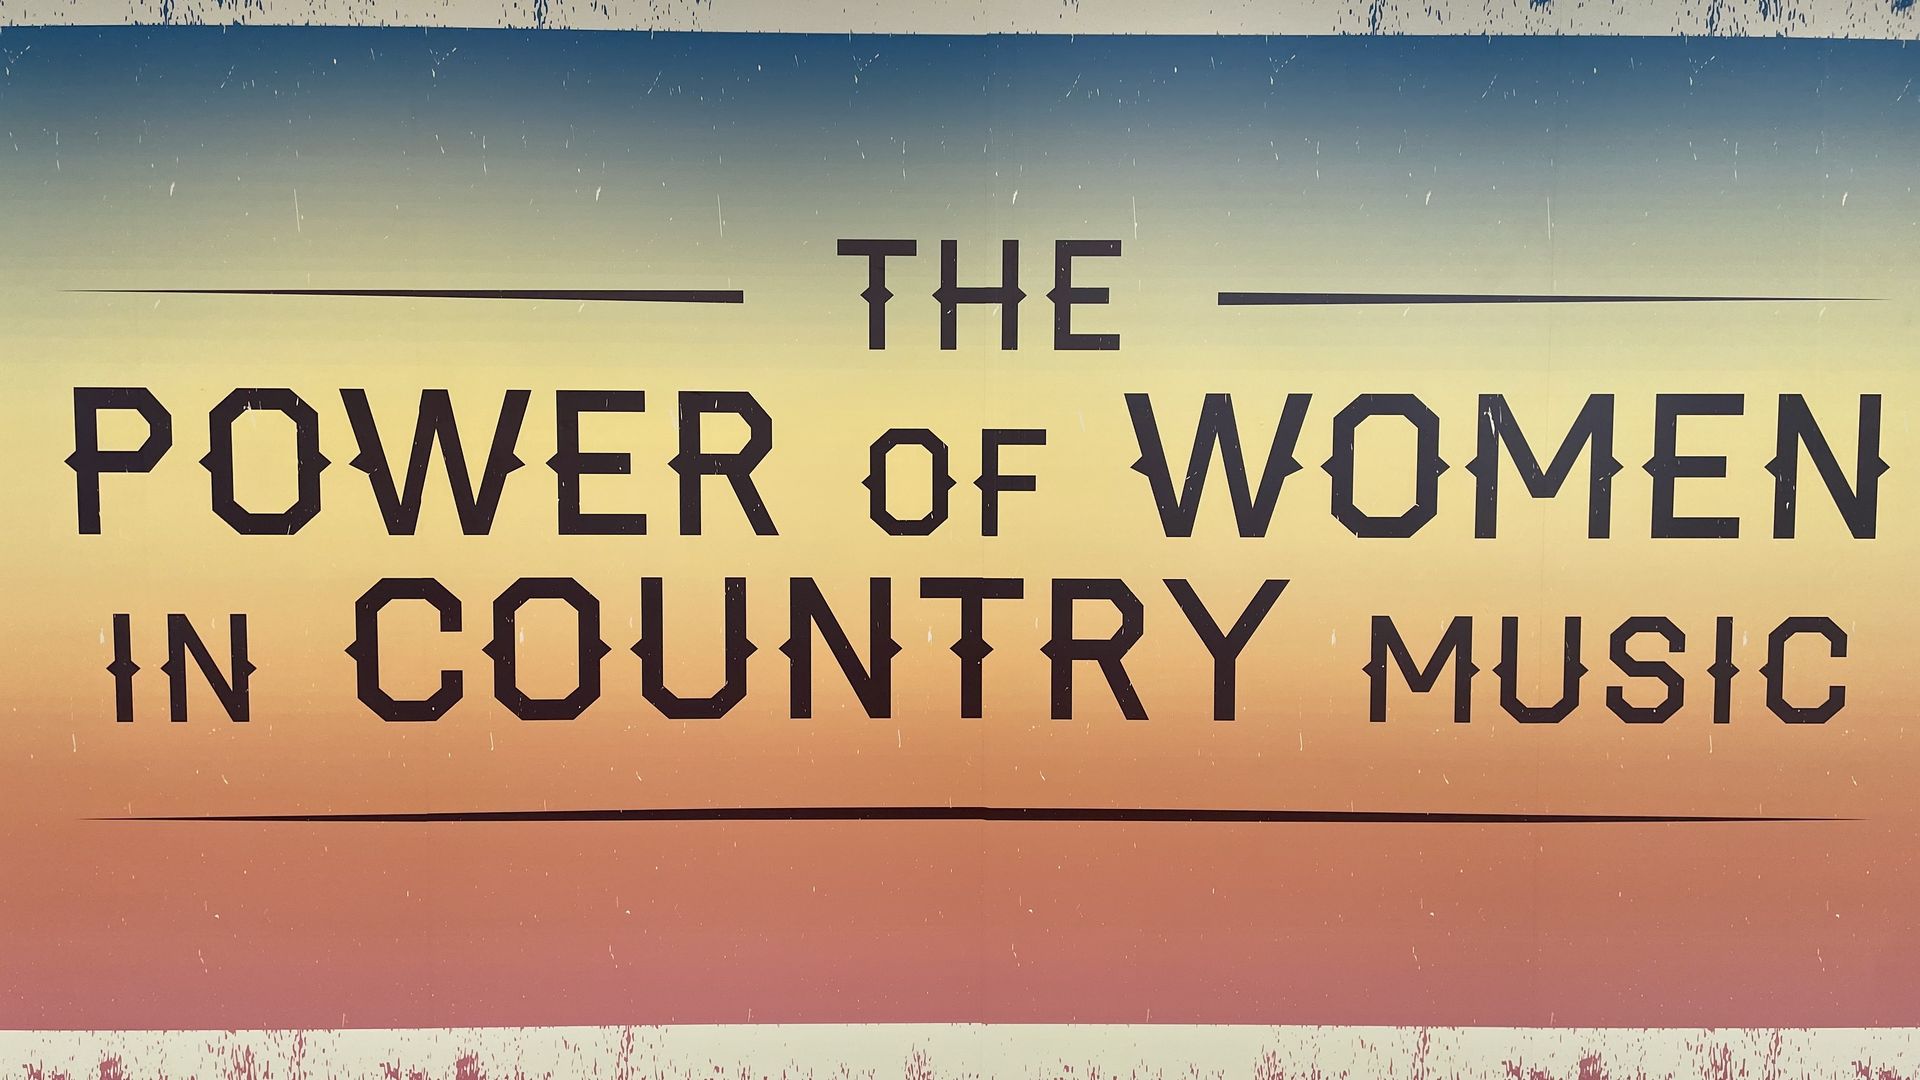 The entrance to The Power of Women in Country Music